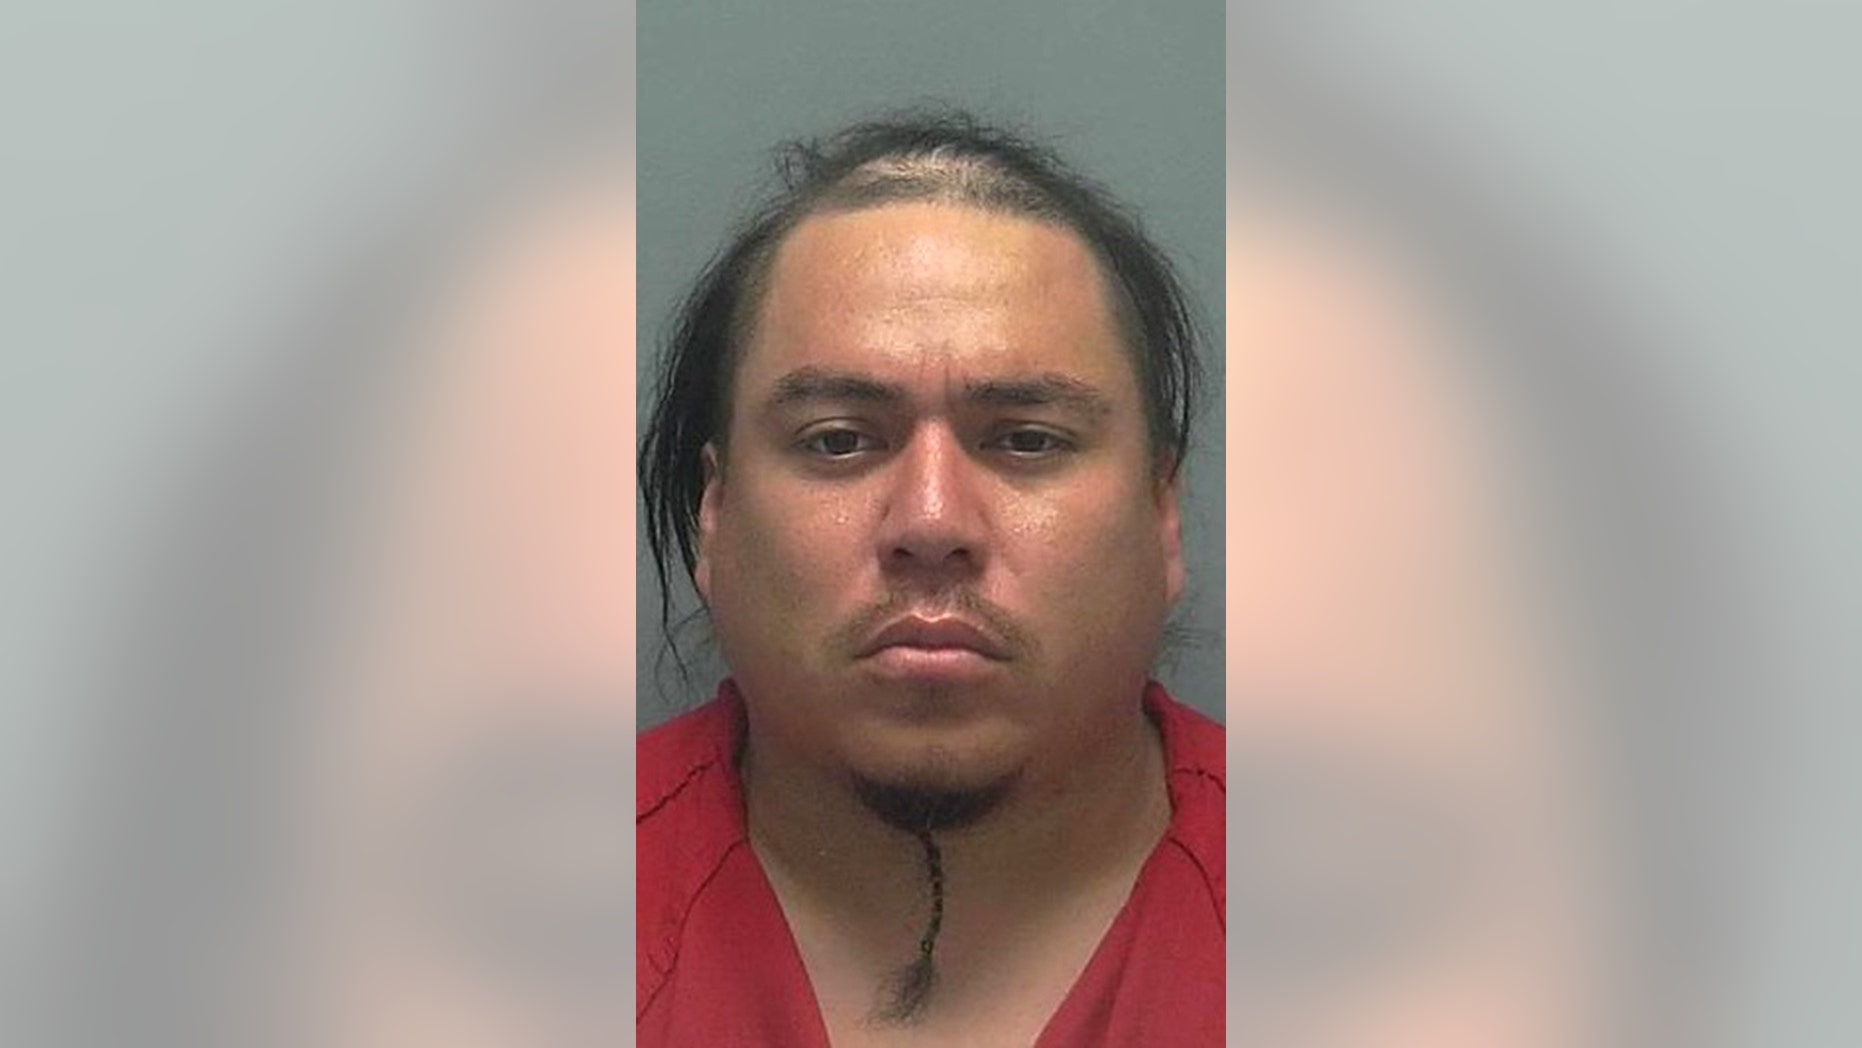 Florida man tried to kidnap 2 women in one night, including victim who begged to be set free, police say